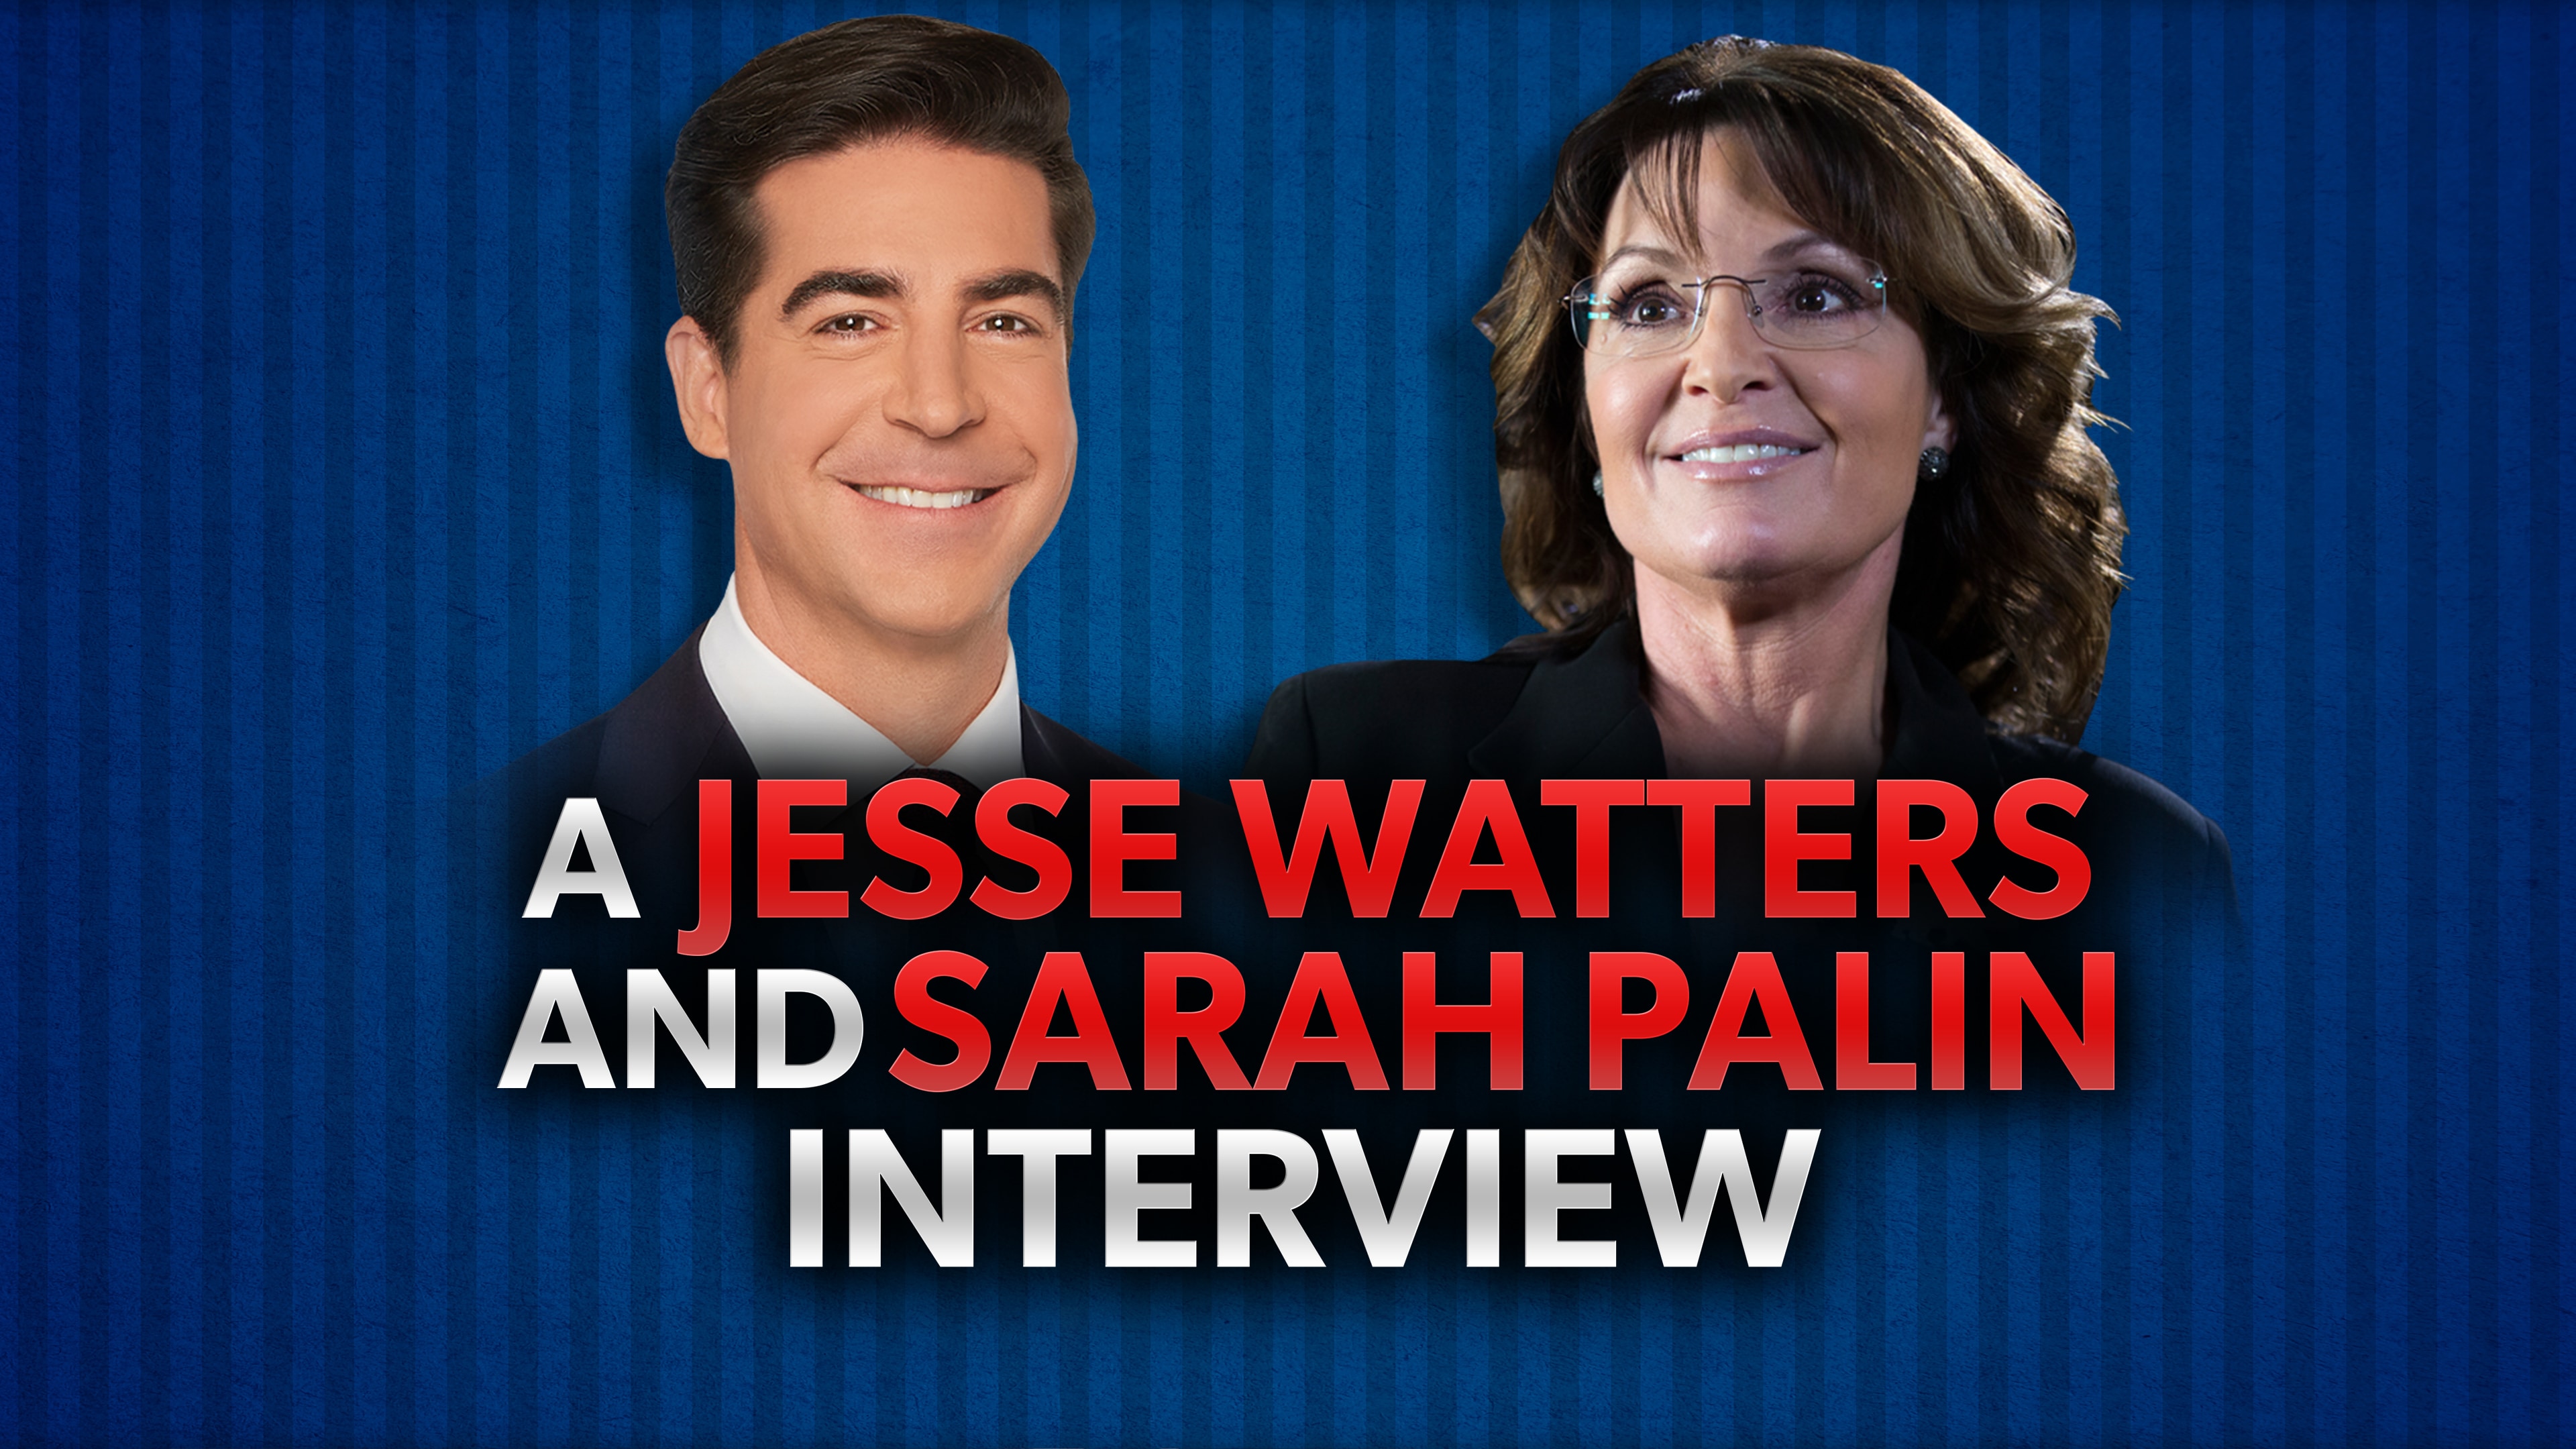 A Jesse Watters and Sarah Palin Interview